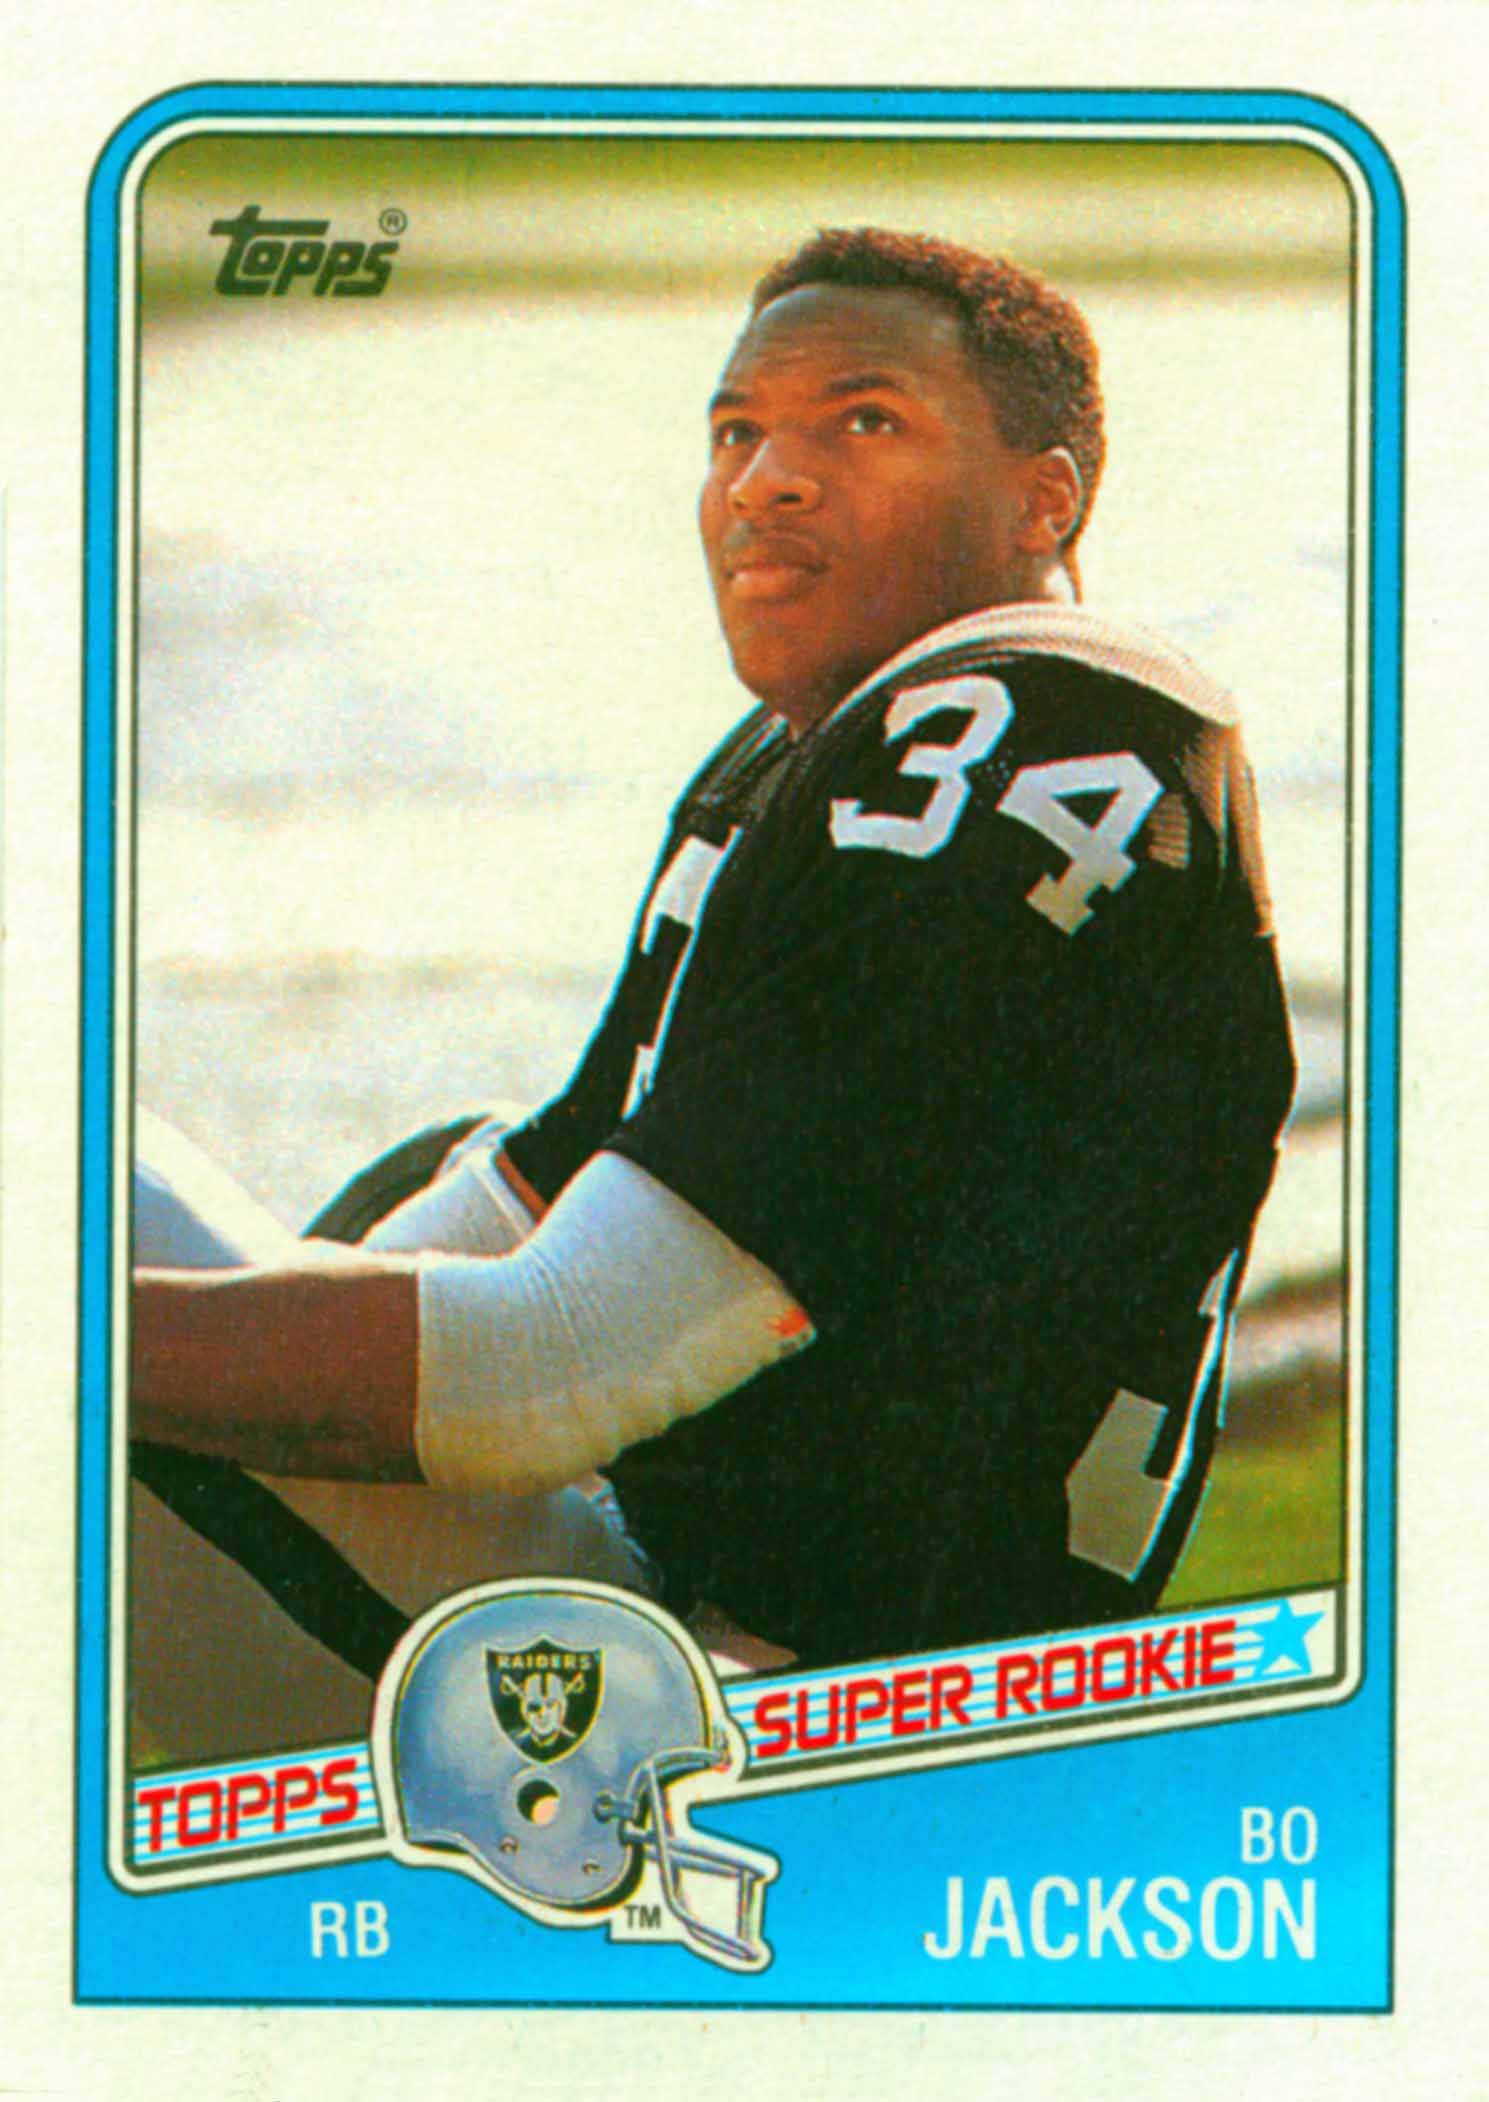 1988 Topps Super Rookie